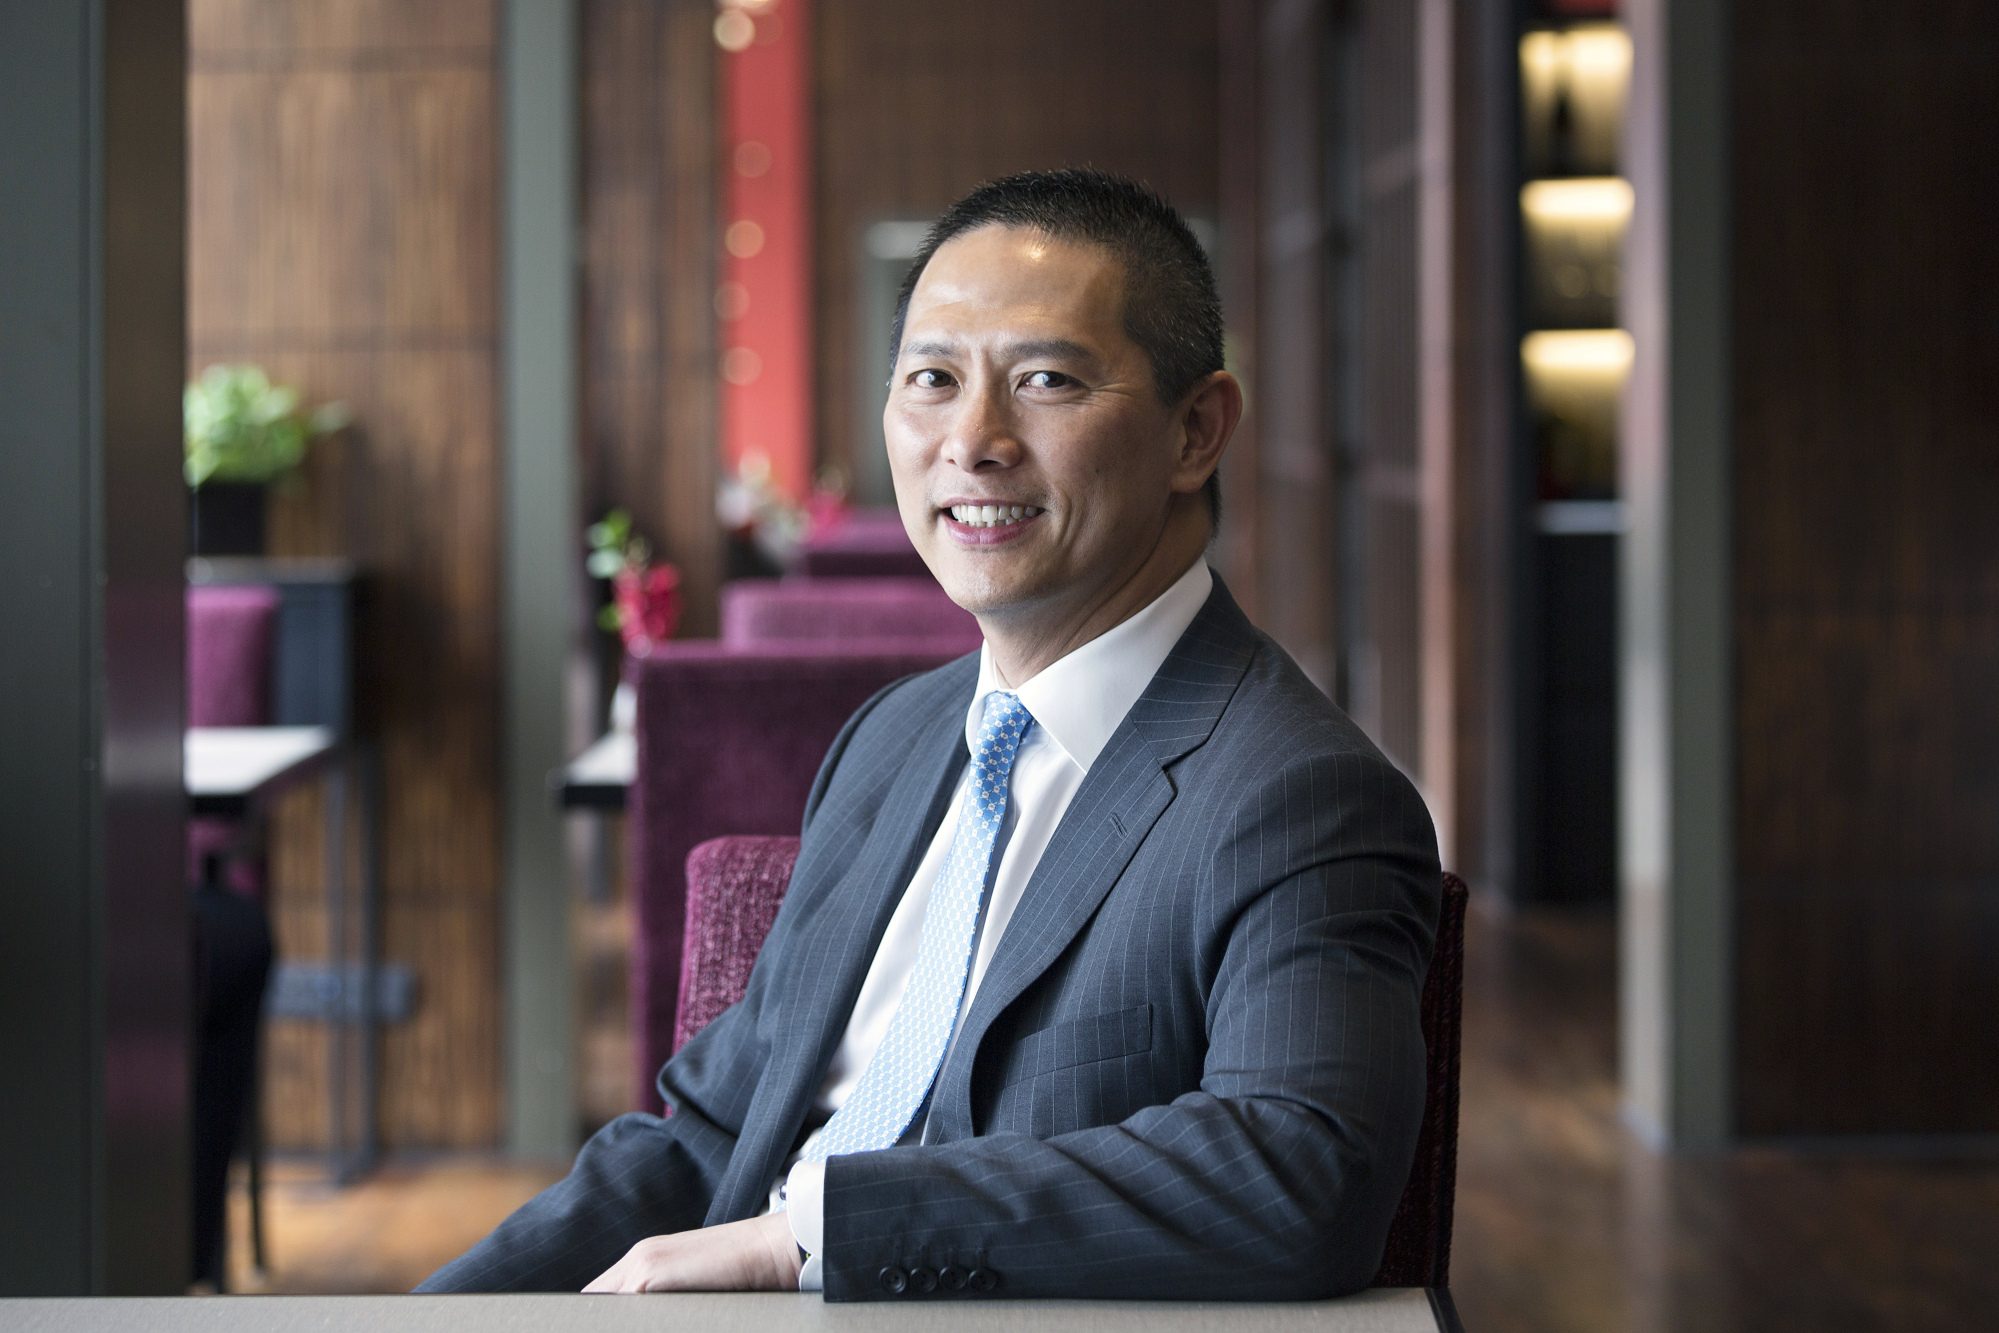 Morgan Stanley taps China's rich looking to set up family offices in Singapore